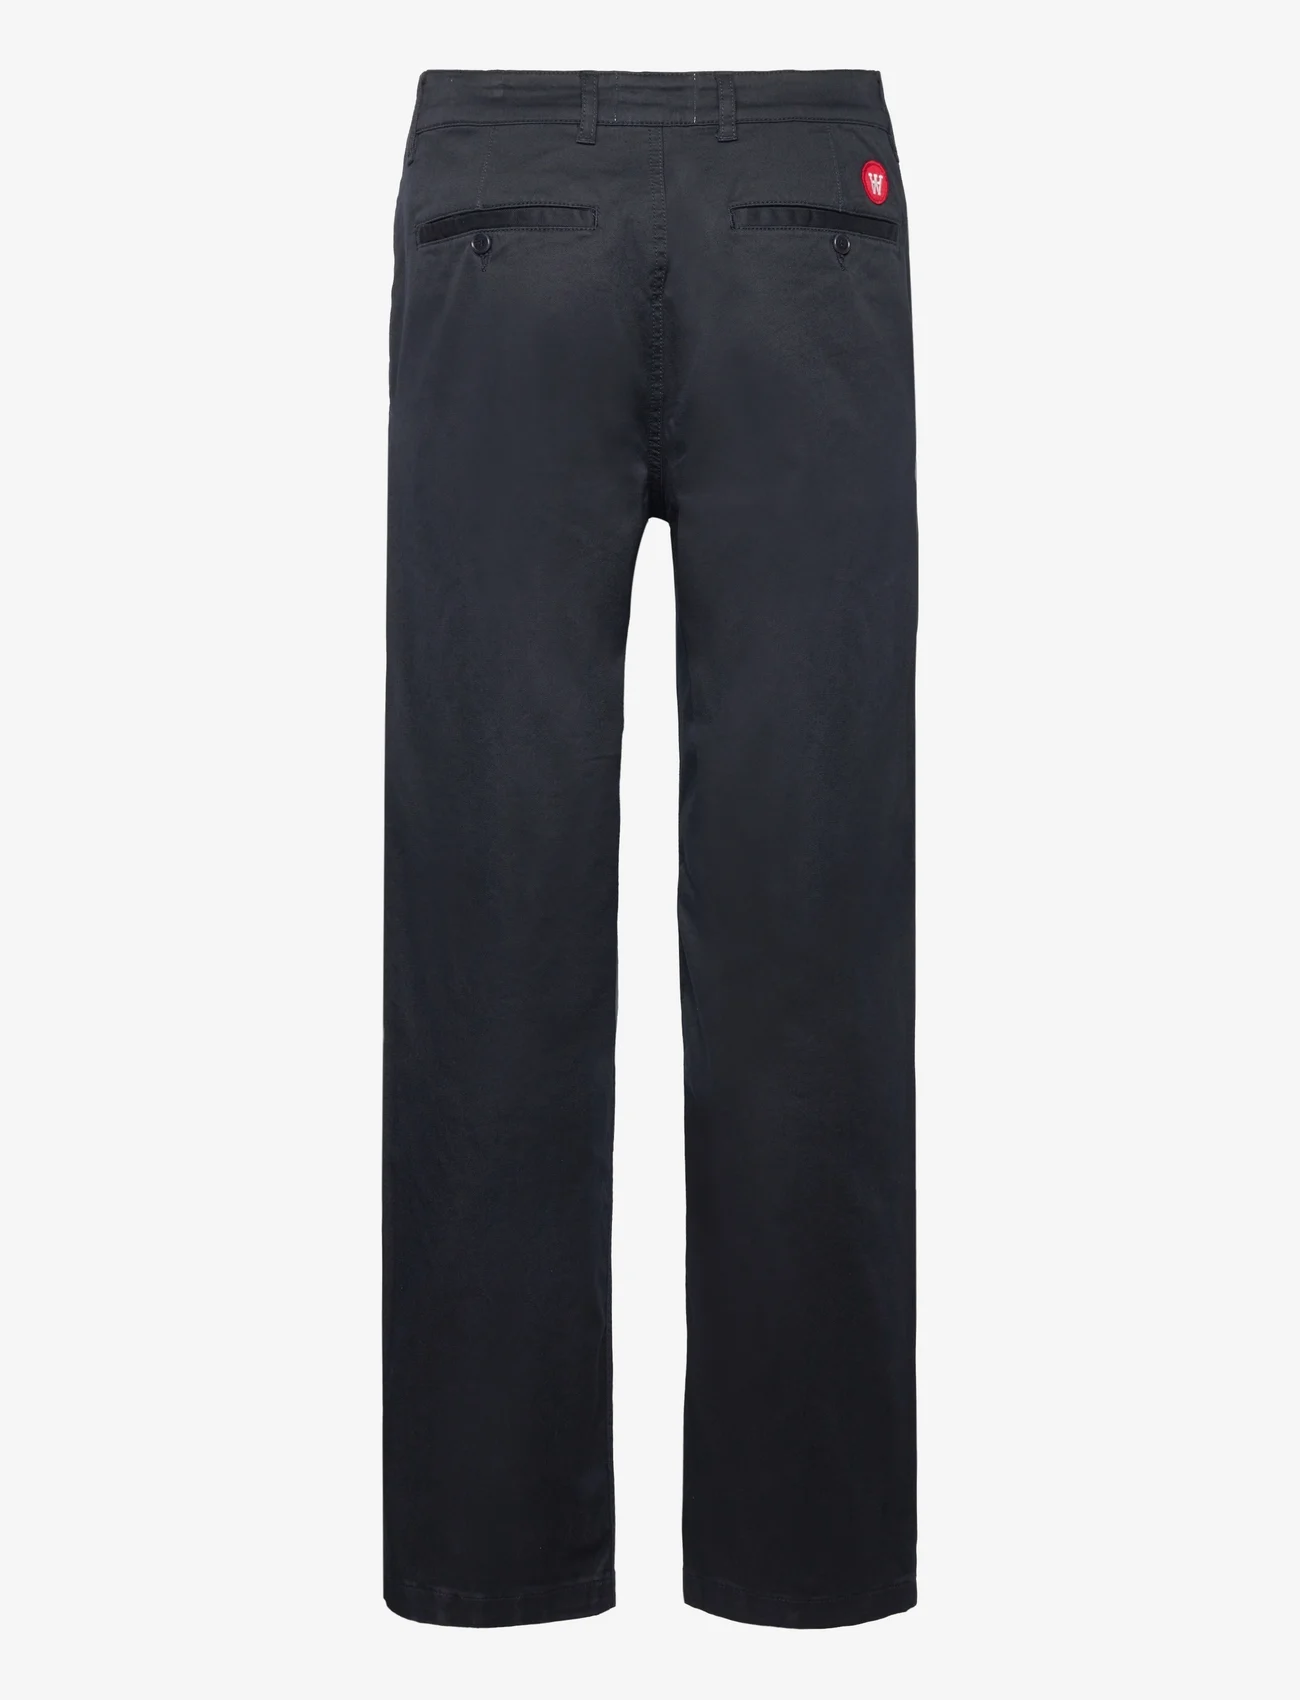 Double A by Wood Wood - Silas classic trousers - chino püksid - navy - 1